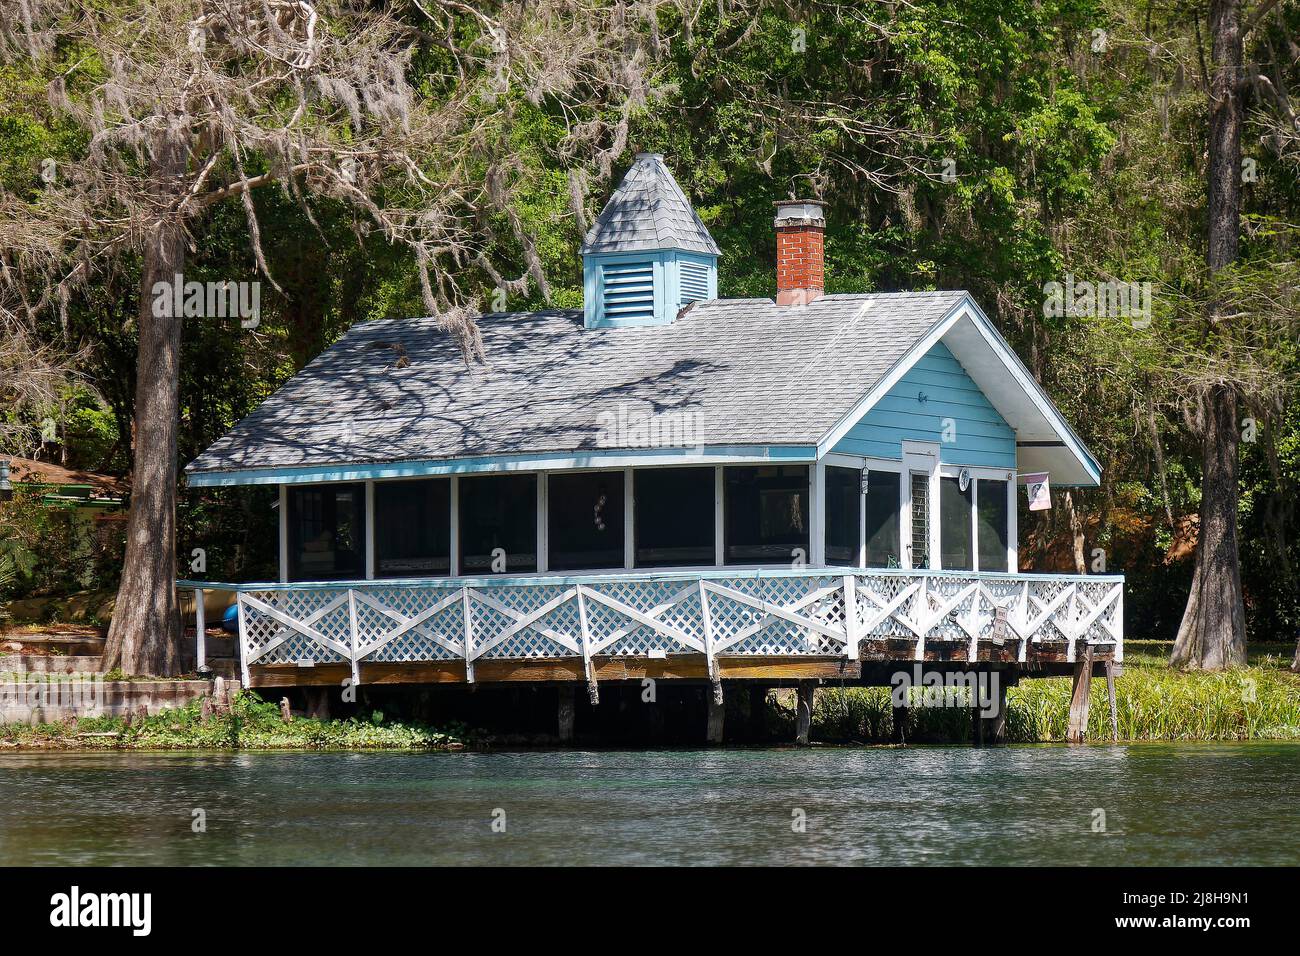 old wood building, on pilings over water, deck, lattice railing, brick chimney, cupola, Rainbow River, Florida, Dunnellon, FL, spring Stock Photo